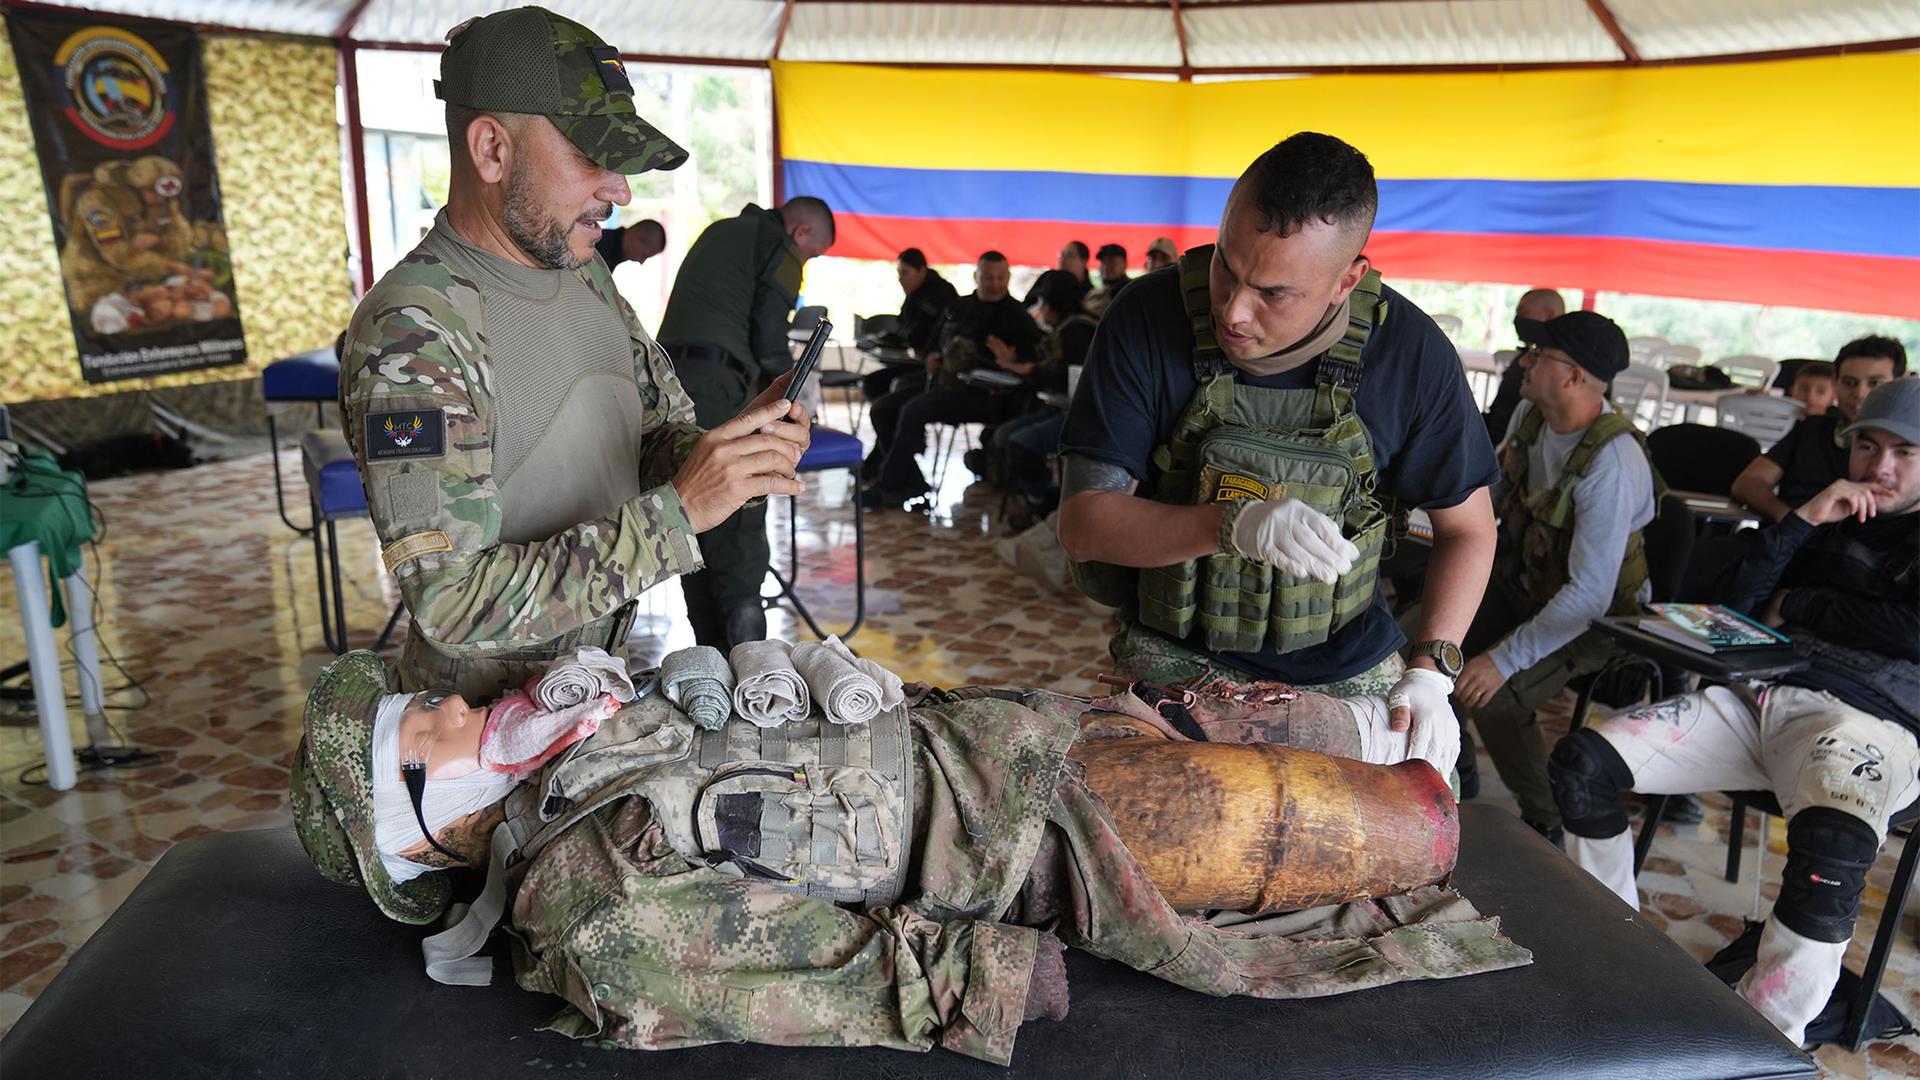  Former combat medic Hector Bernal trains soldiers in tactical medicine at his center outside Bogotá. Bernal says he’s trained more than 20 soldiers who have gone to Ukraine recently.